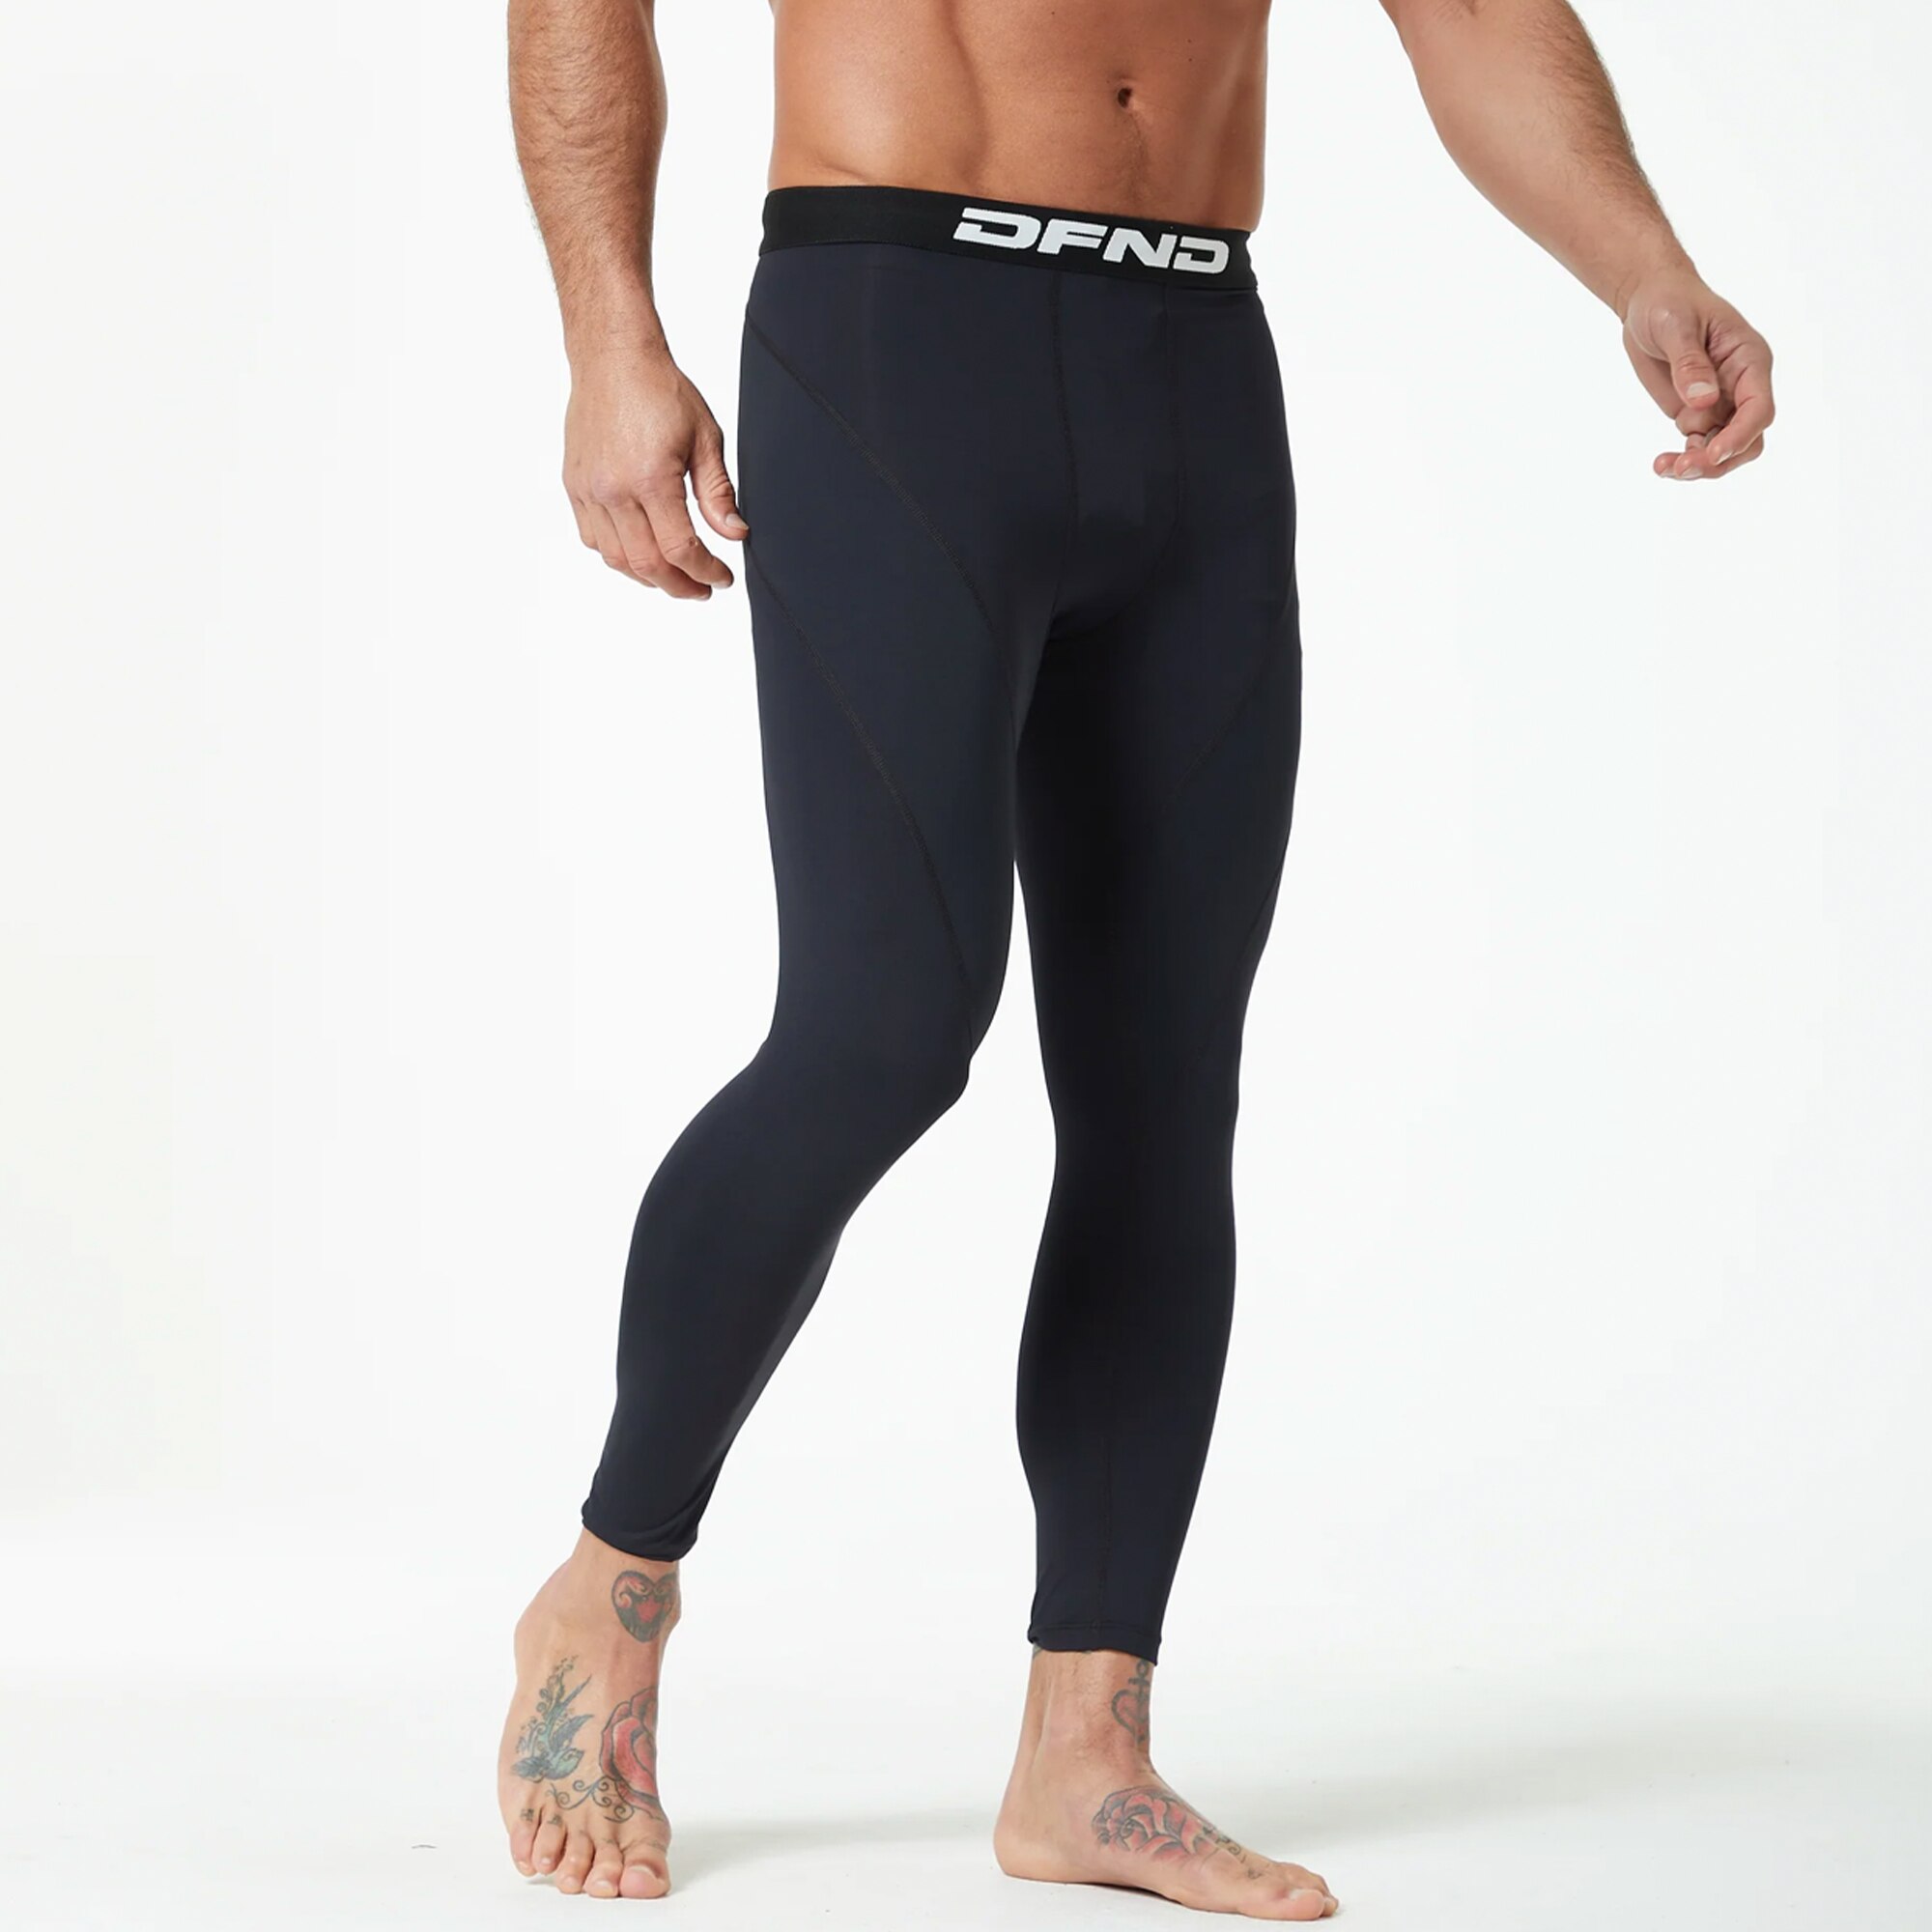 DNFD Active AX Compression Tights, Small - CVS Pharmacy